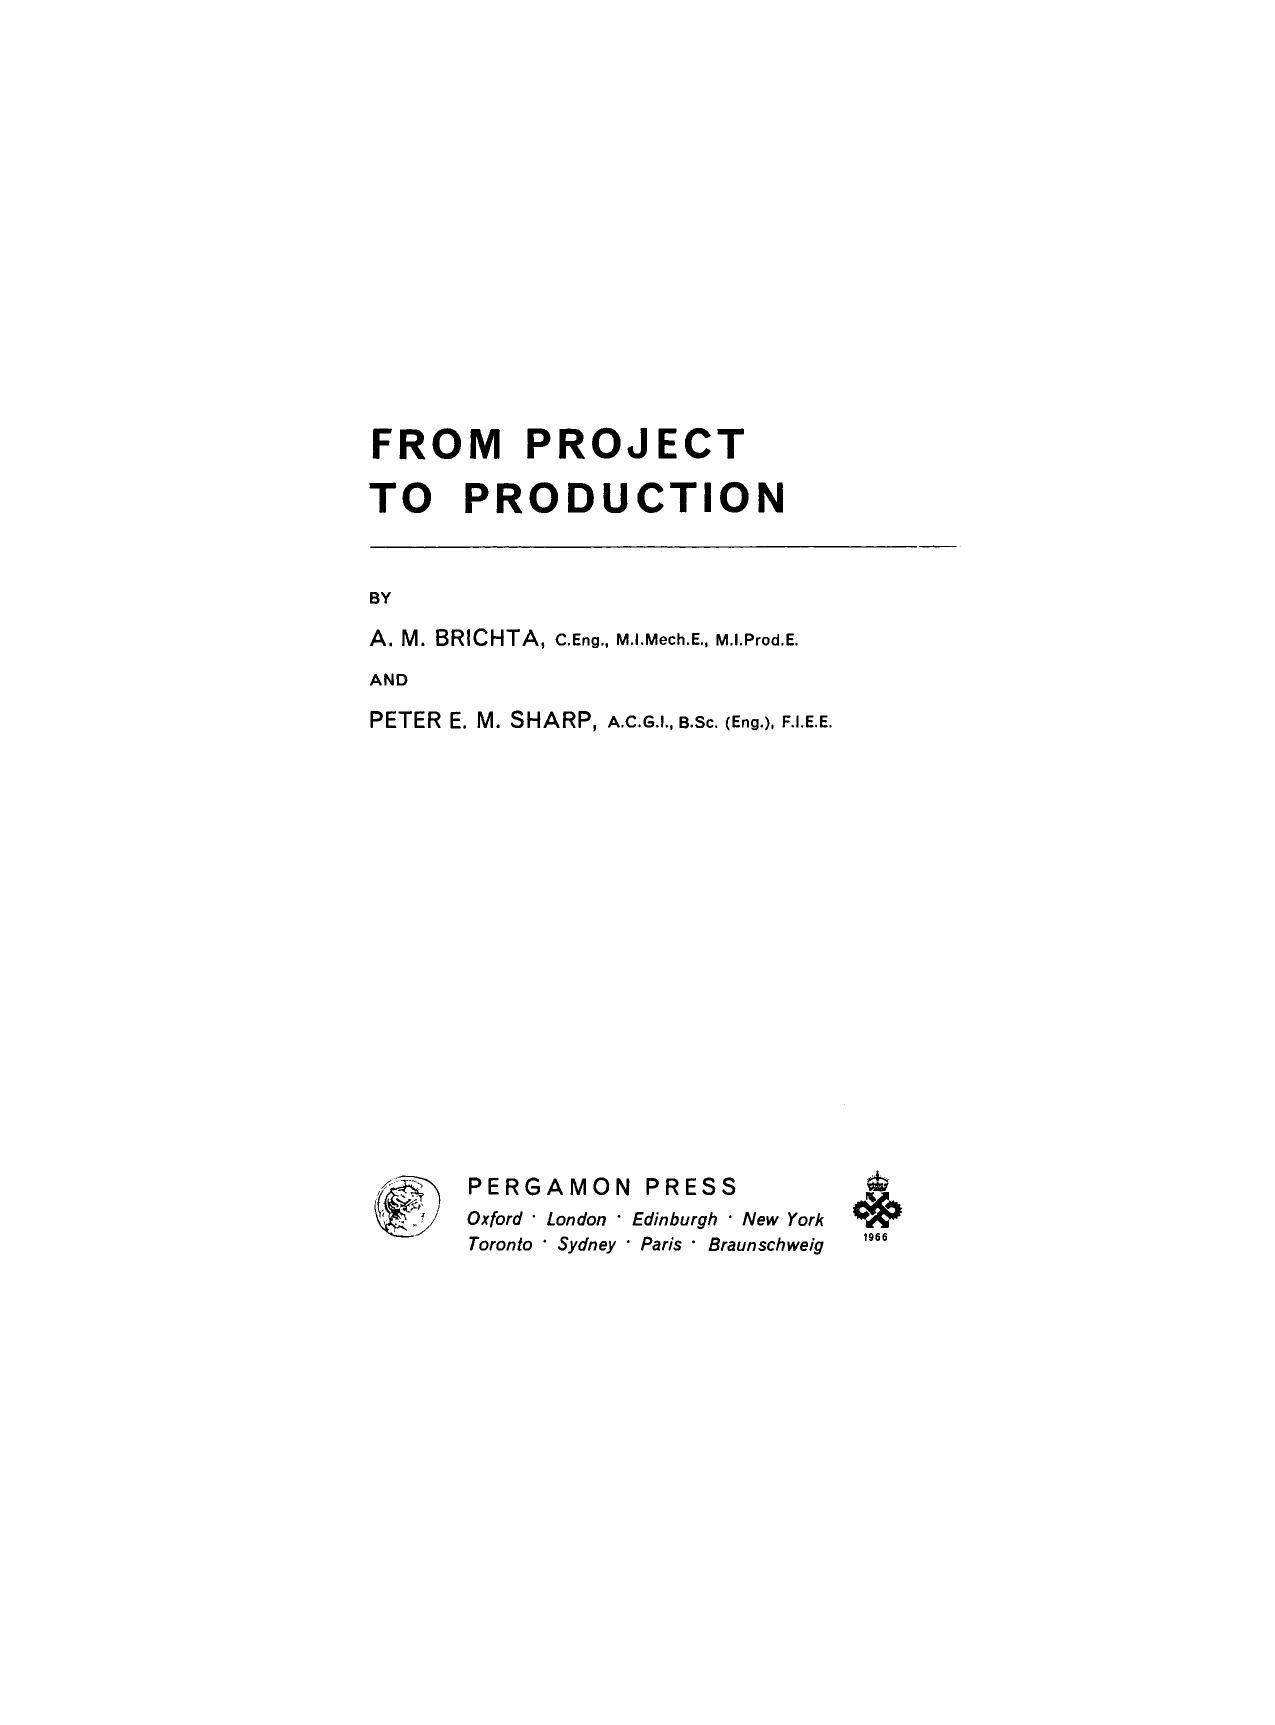 From Project to Production